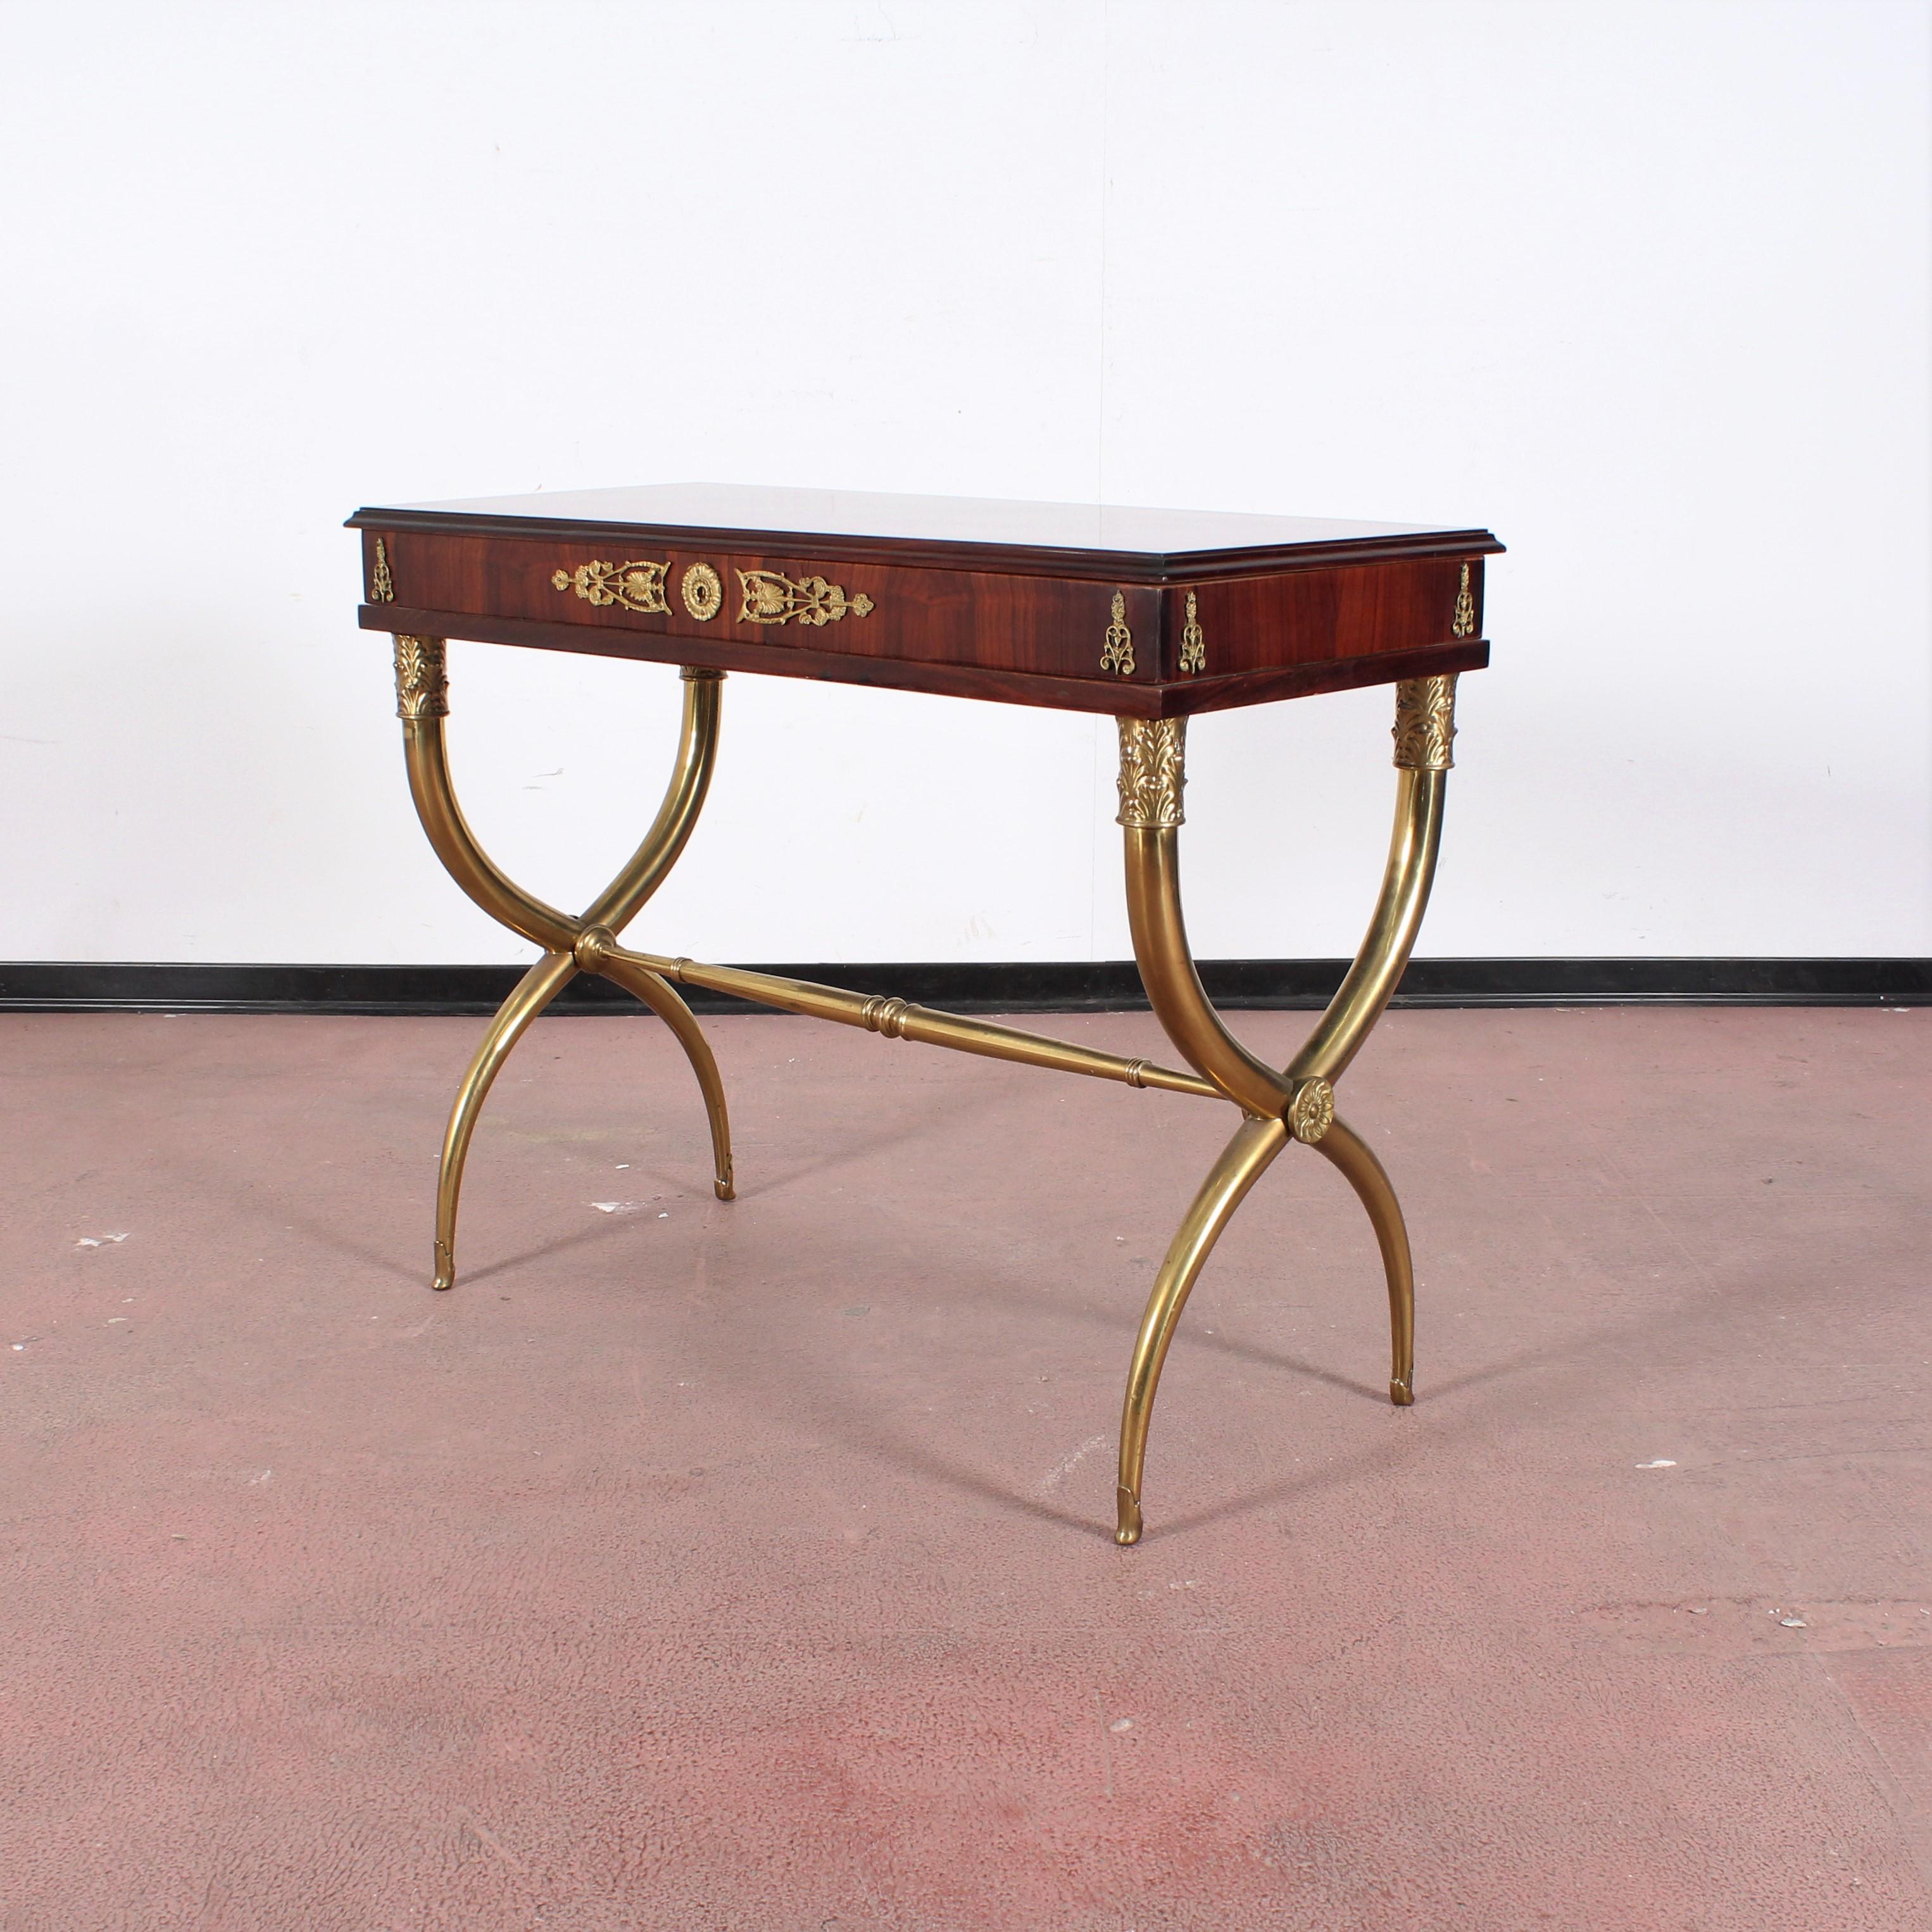 Midcentury Gio Ponti Wood and Brass Console Table with Top Container 1950s Italy 1